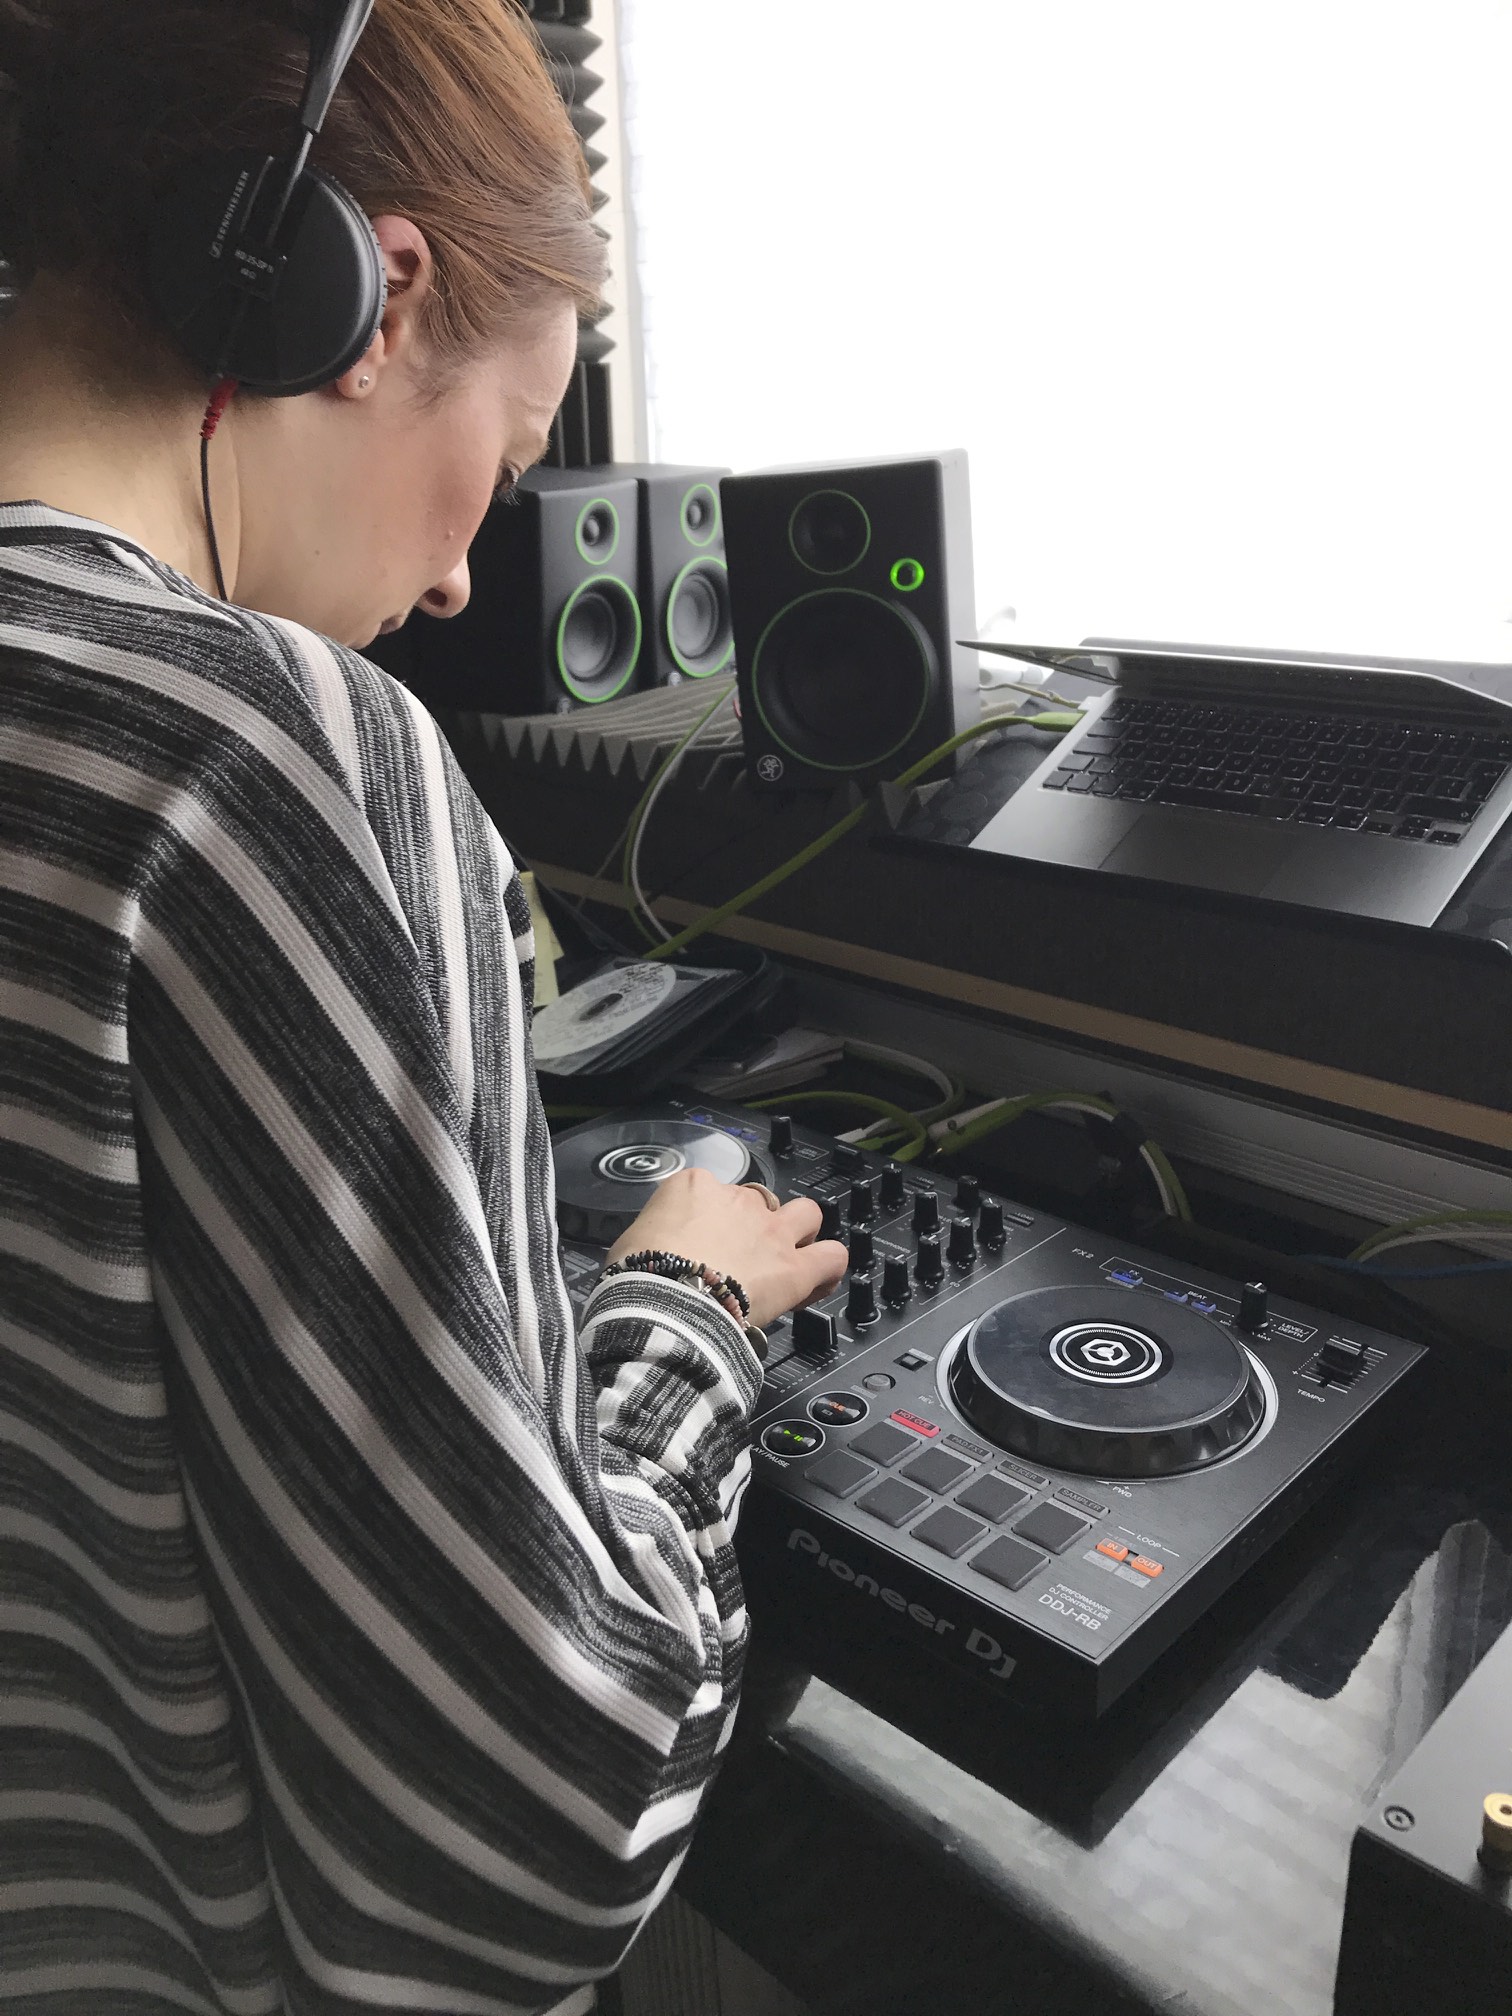 Learn To To DJ at On The Rise DJ Academy / Chloe - Student (DJ Course)